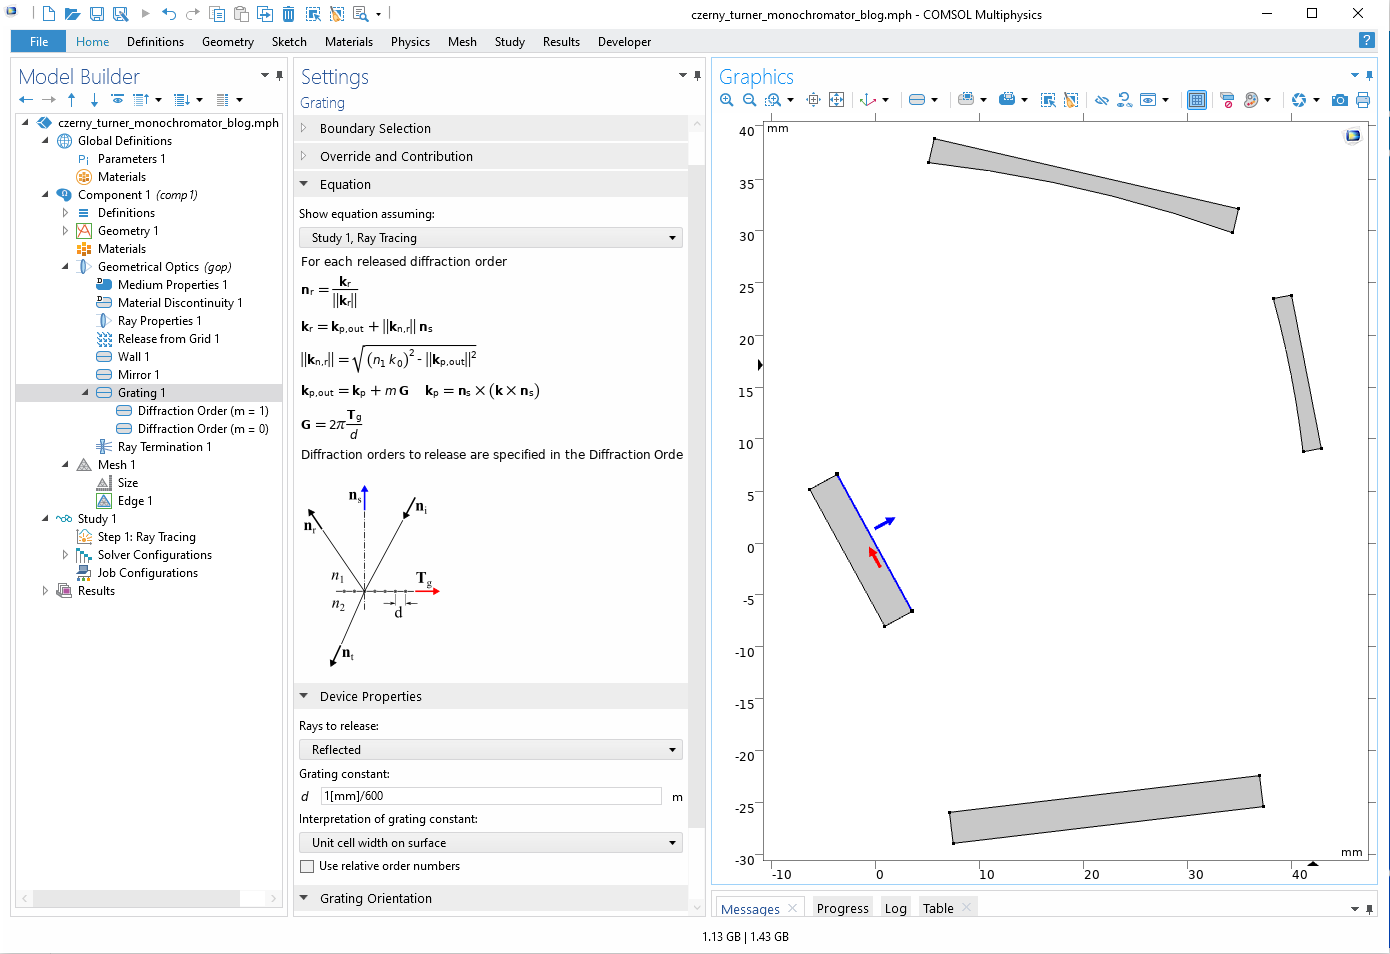 The COMSOL Multiphysics UI showing the Model Builder with the Grating 1 feature selected, the corresponding Settings window, and the Czerny–Turner Monochromator model in the Graphics window.